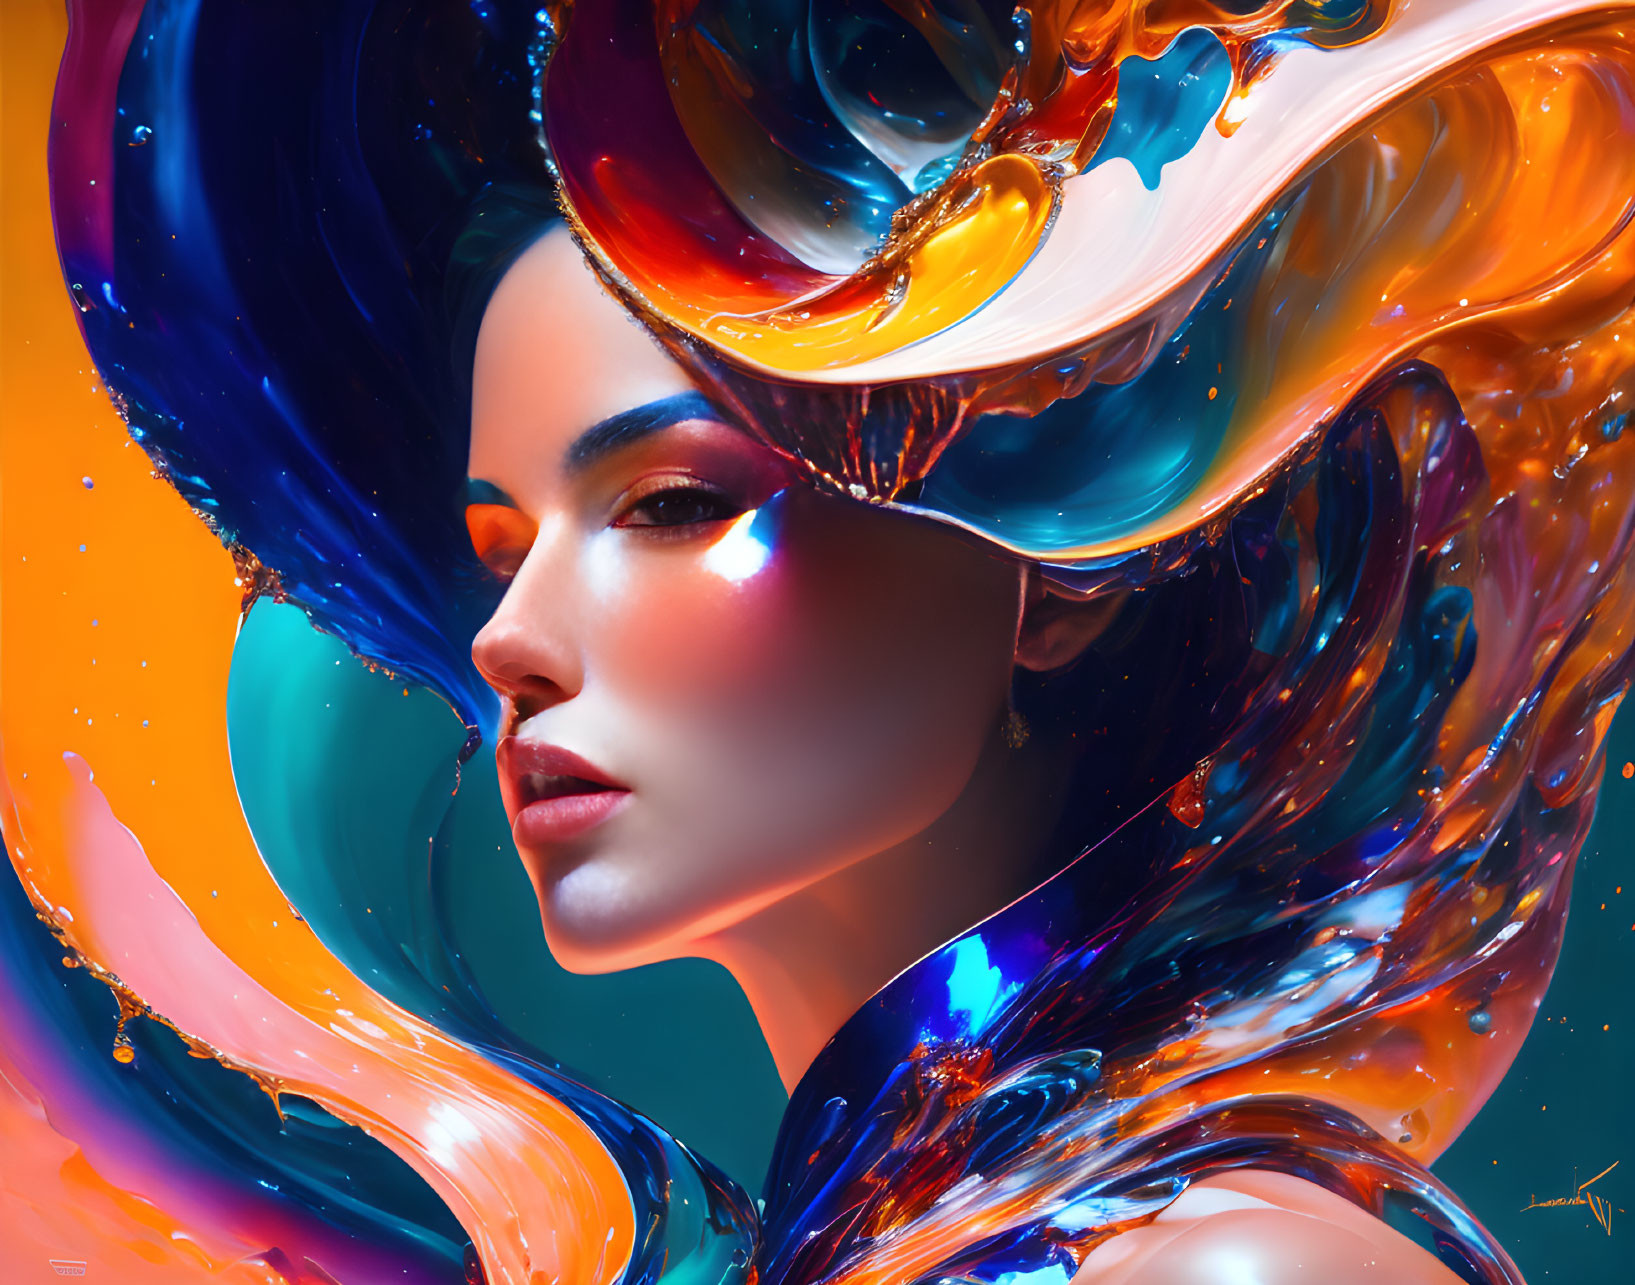 Colorful Swirling Hair Portrait of a Woman with Vibrant Makeup